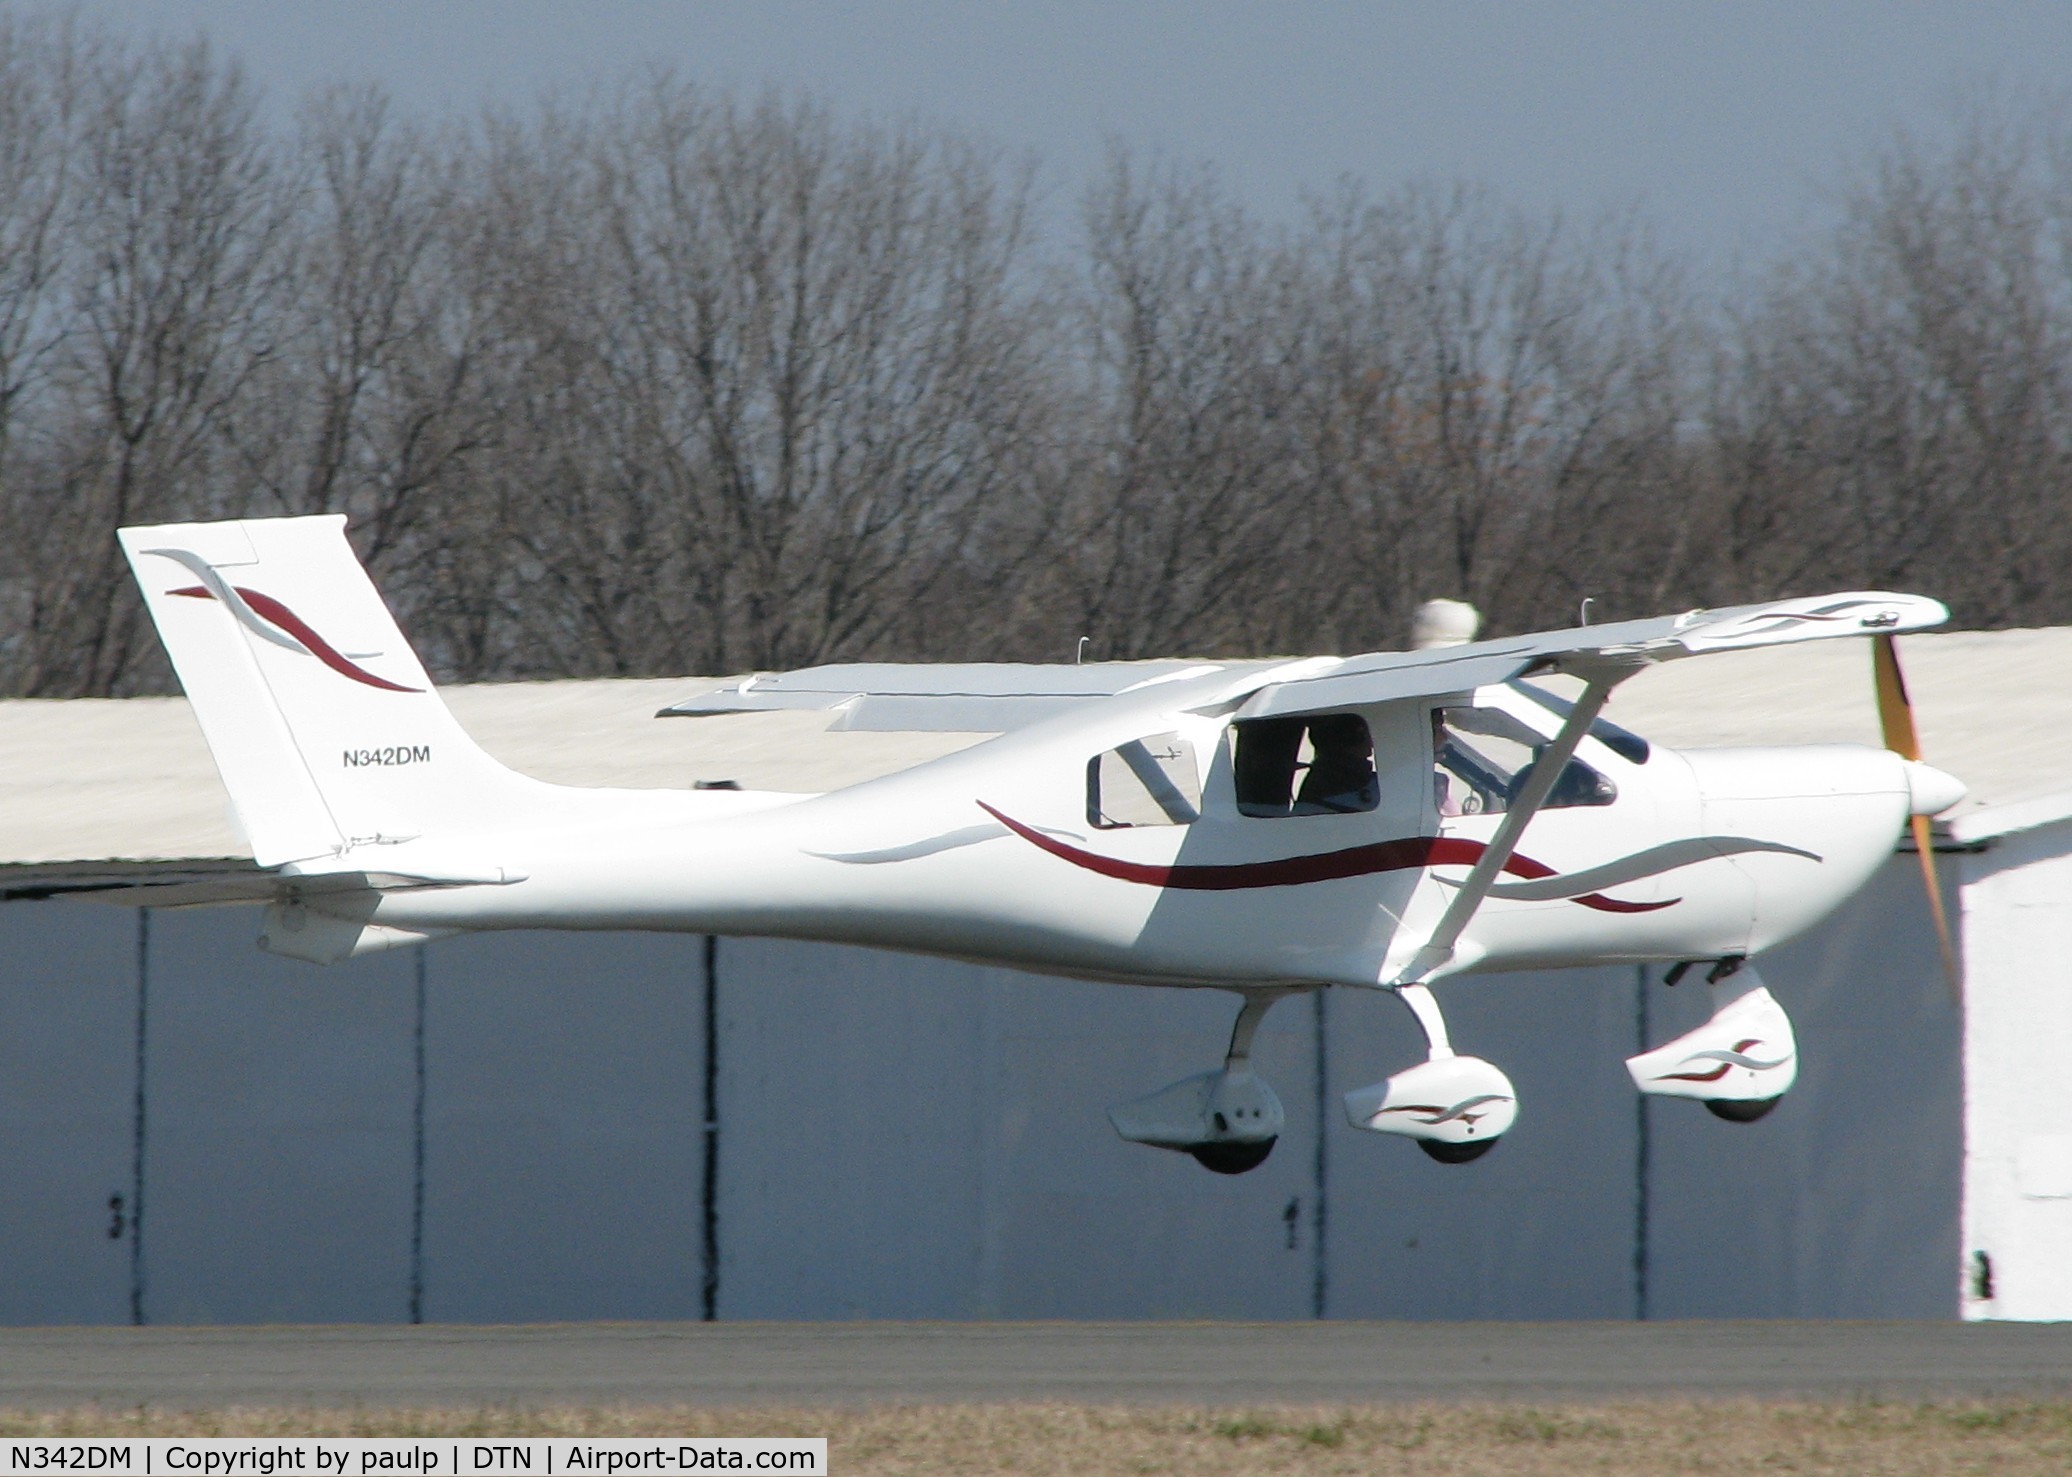 N342DM, 2006 Jabiru J400 C/N 091, About to touch down on 14 at Downtown Shreveport.